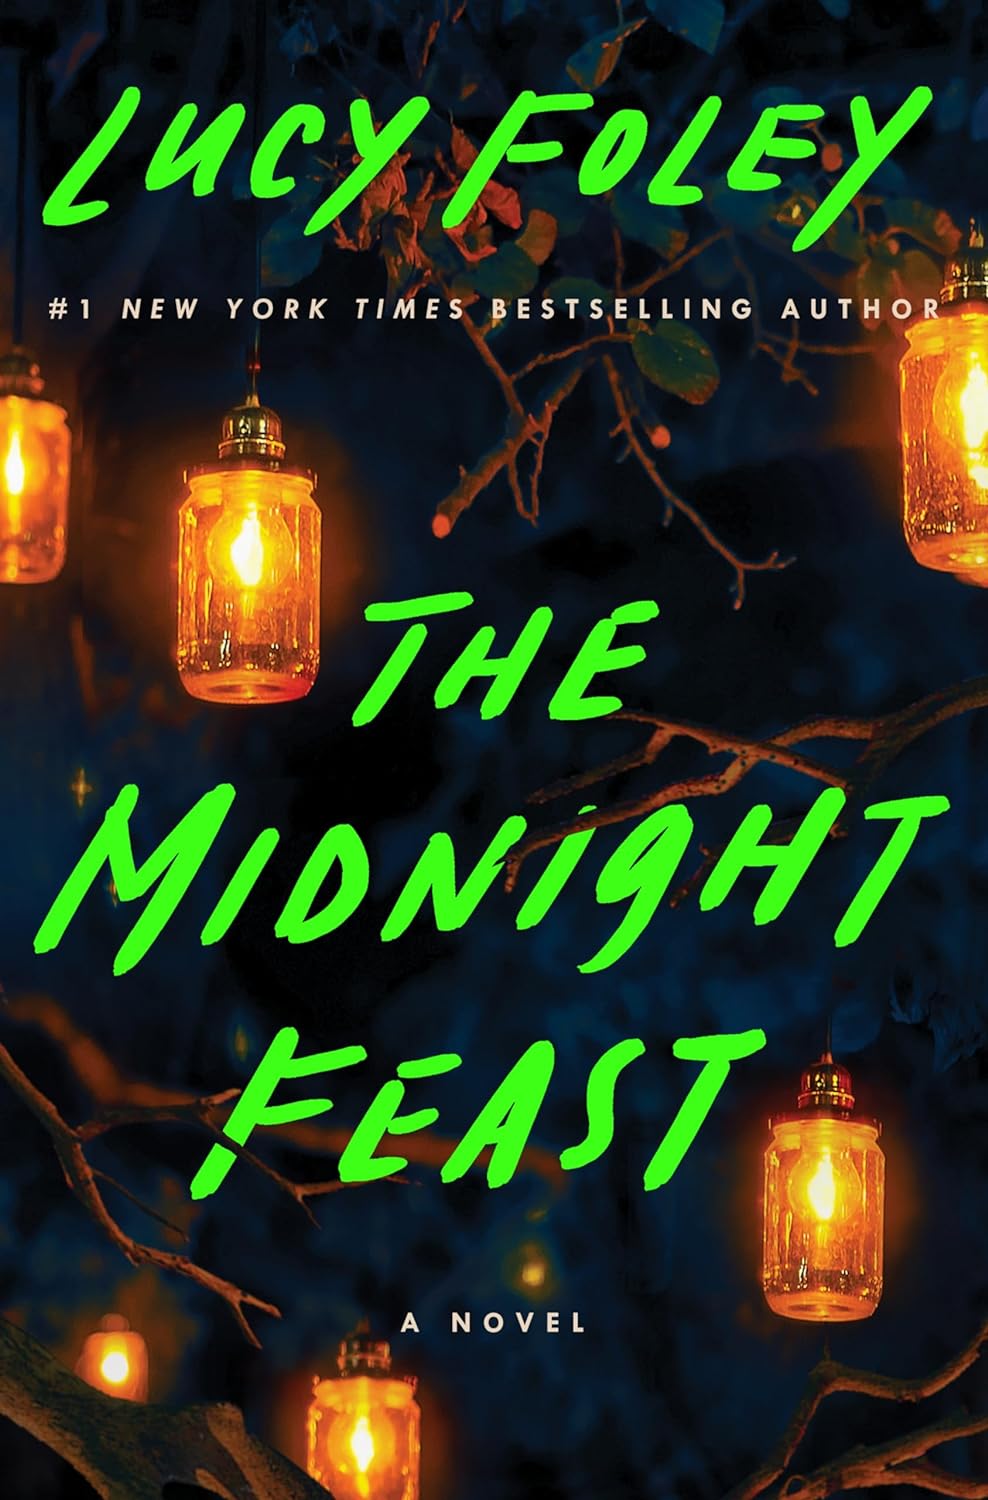 Lucy Foley - The Midnight Feast